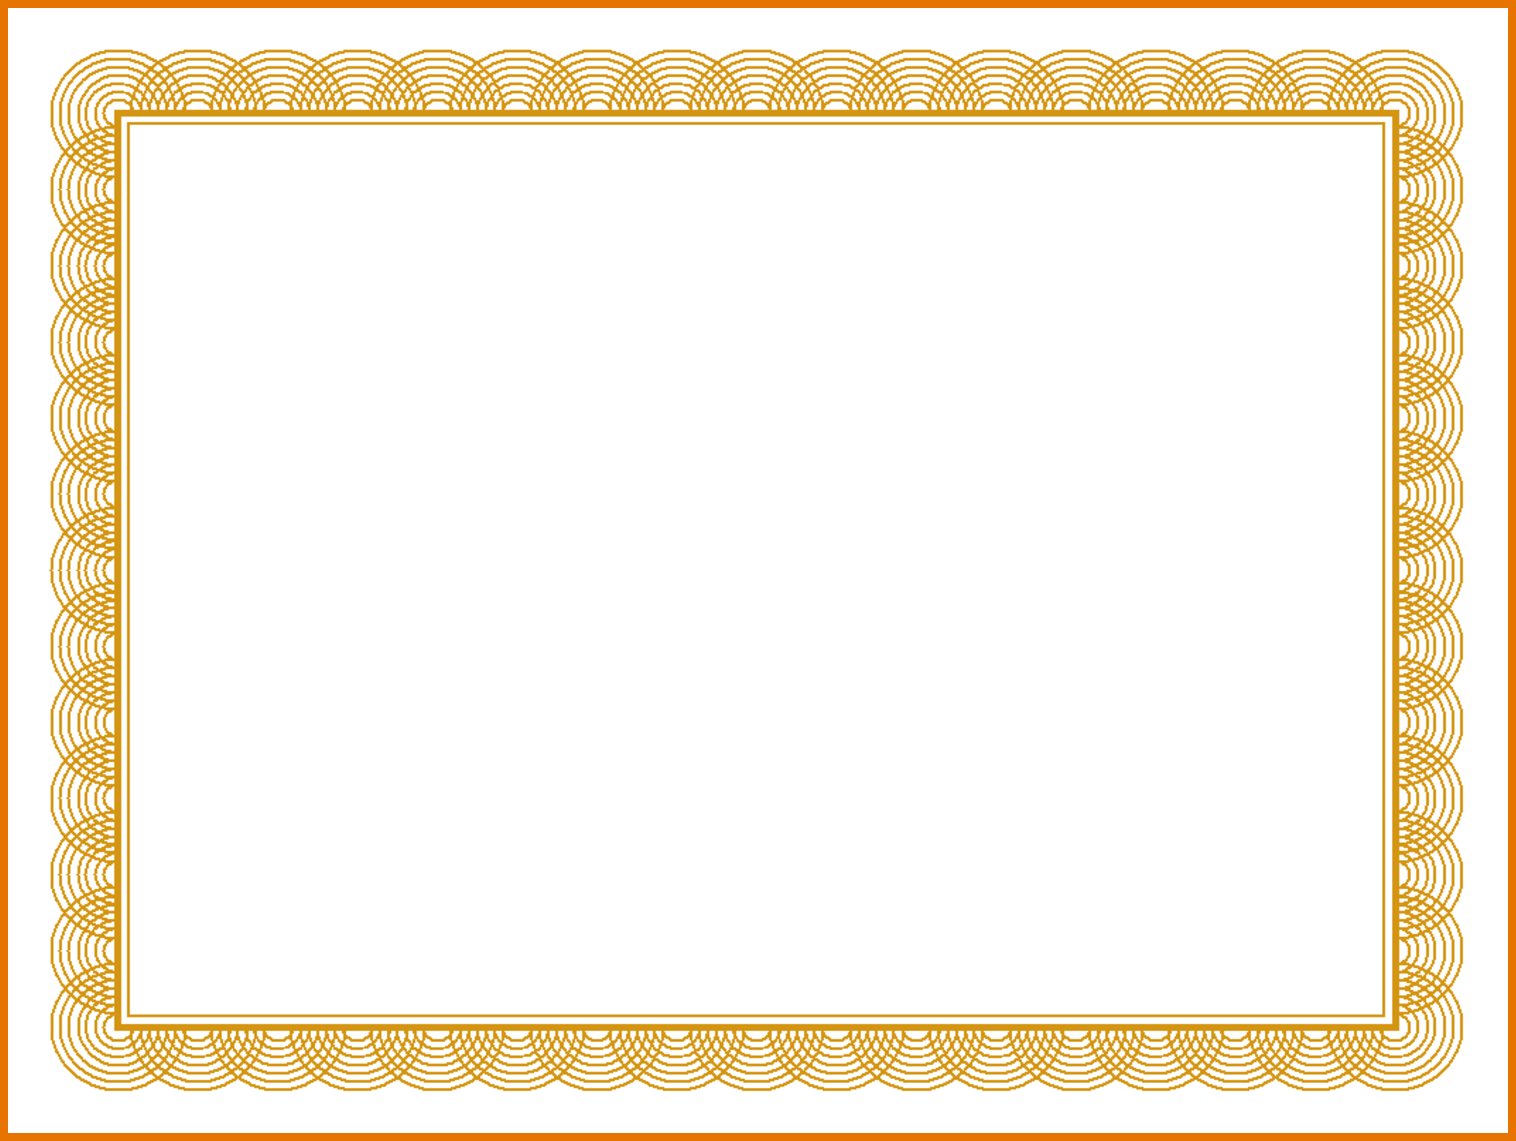 Certificate Template PNG - 6638